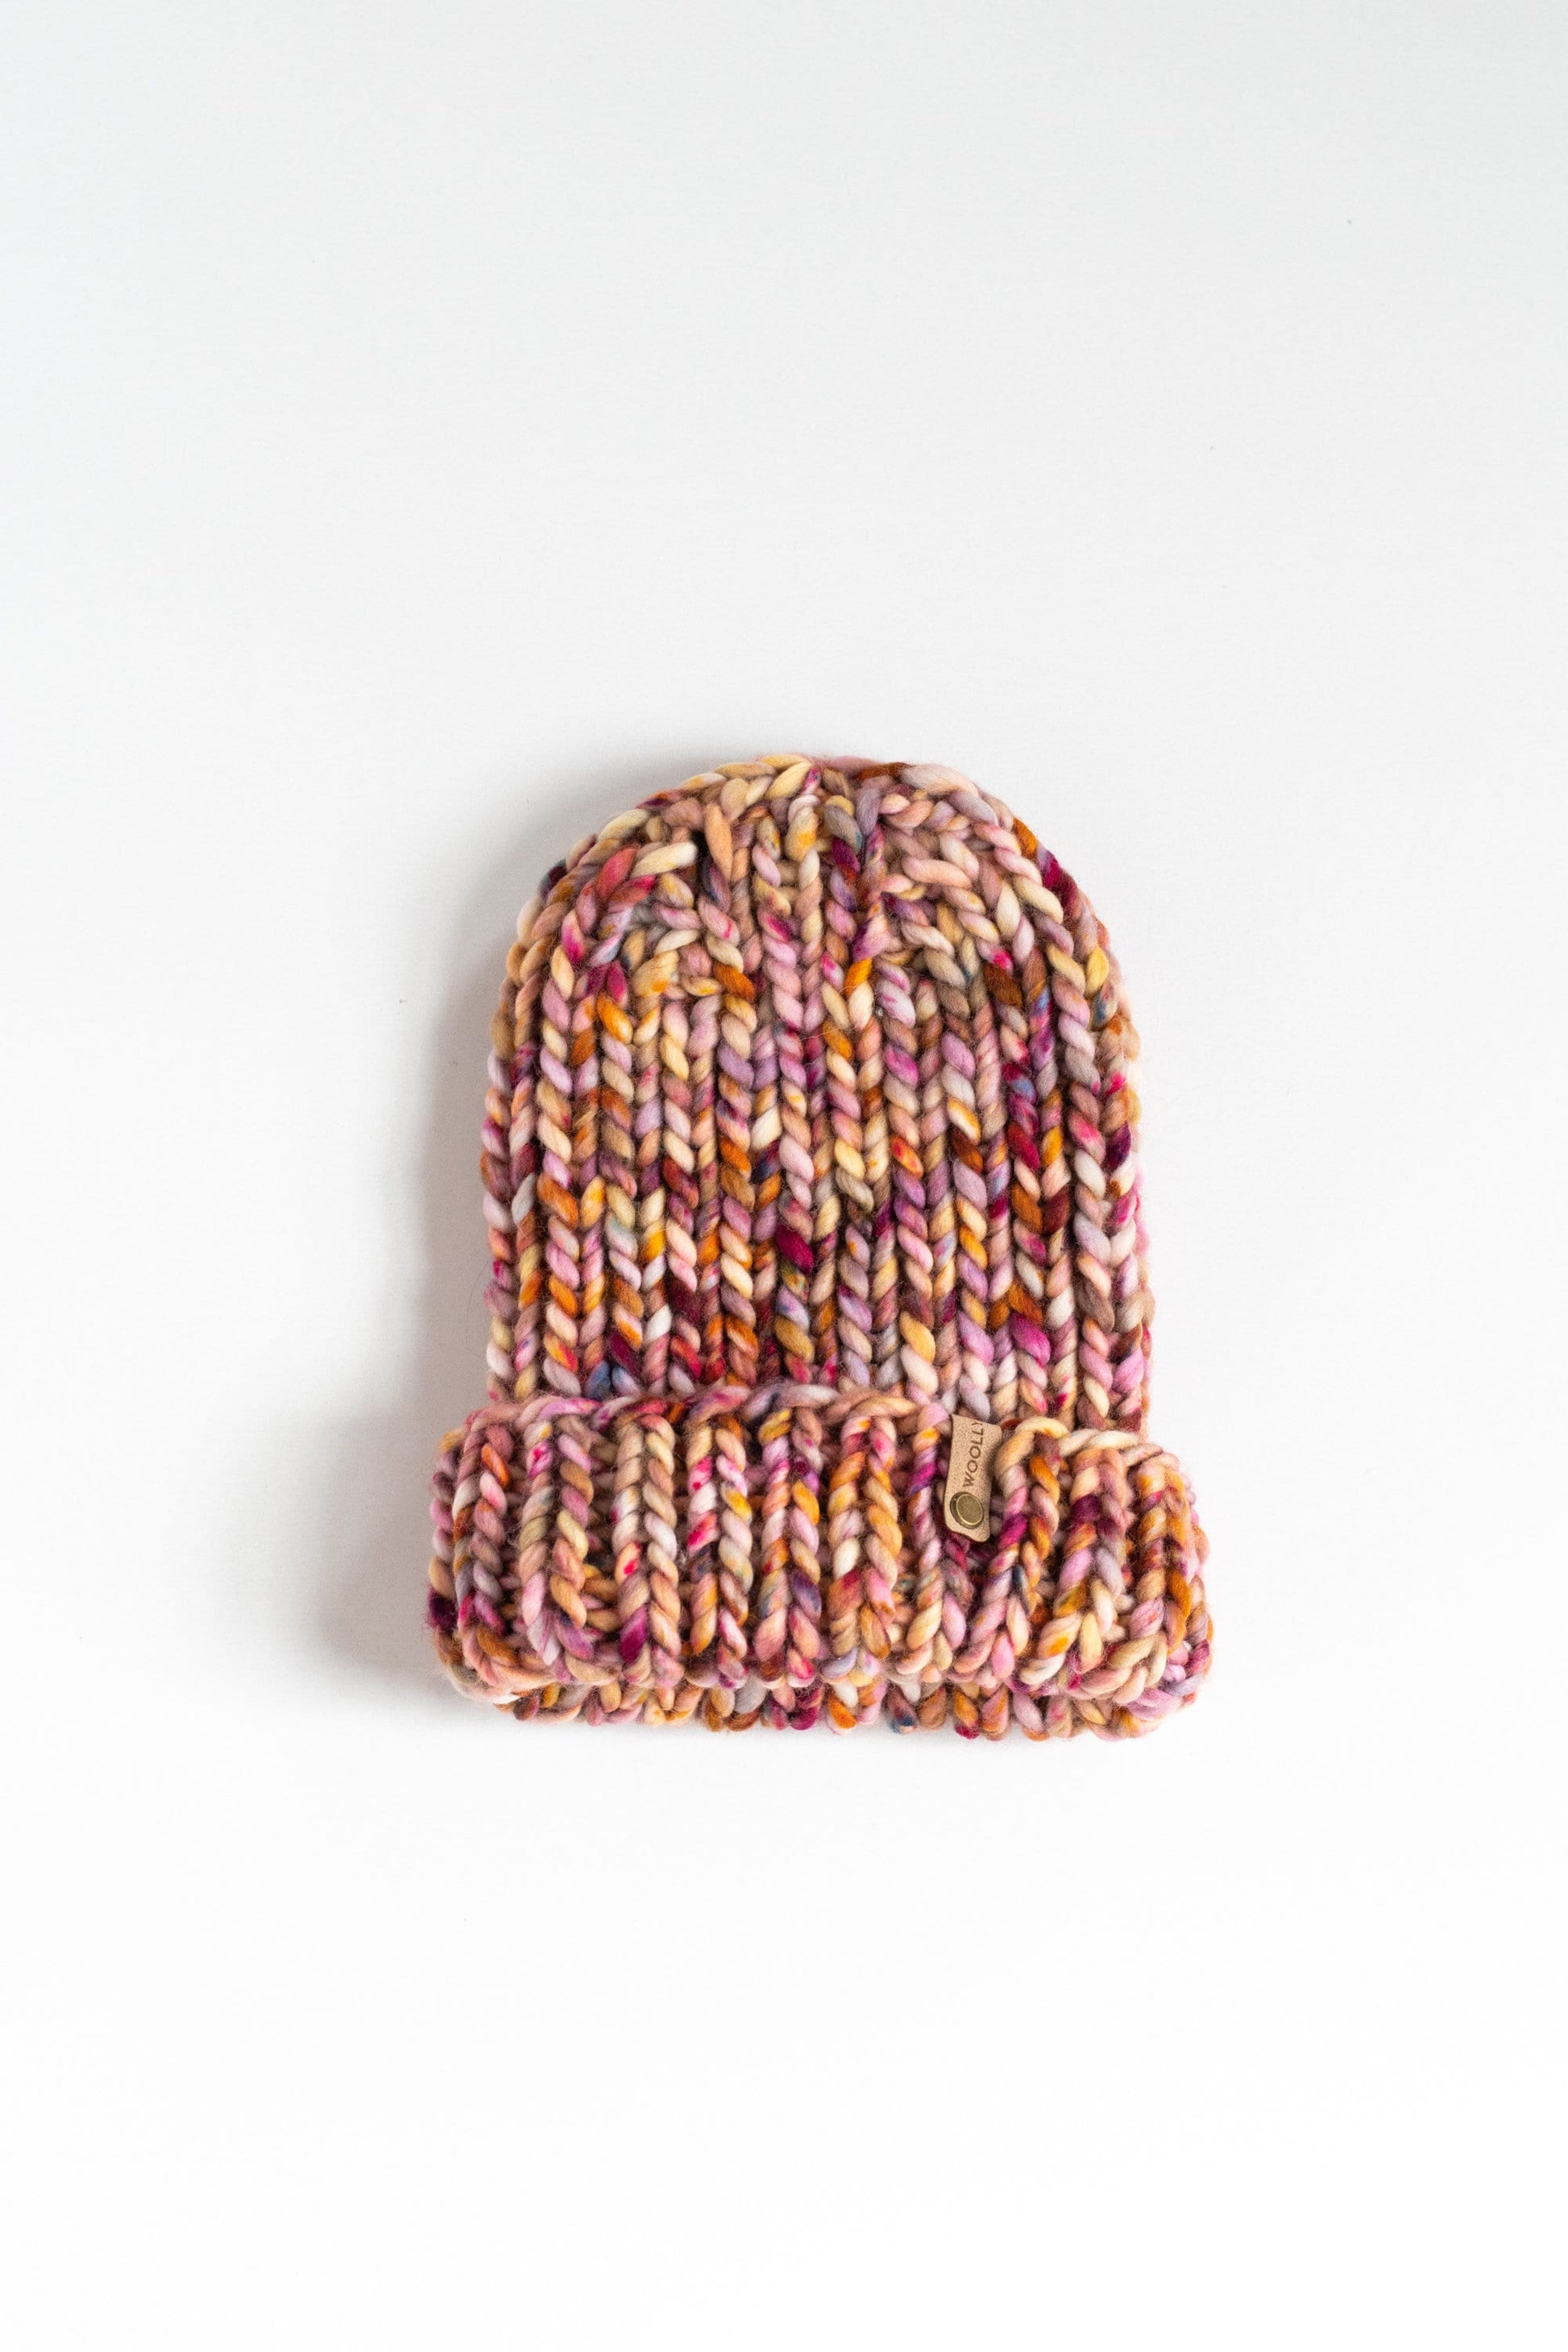 Pink Merino Wool Ribbed Knit Hat, Adult Chunky Knit Beanie, Ethically Sourced Wool Hand Knit Hat